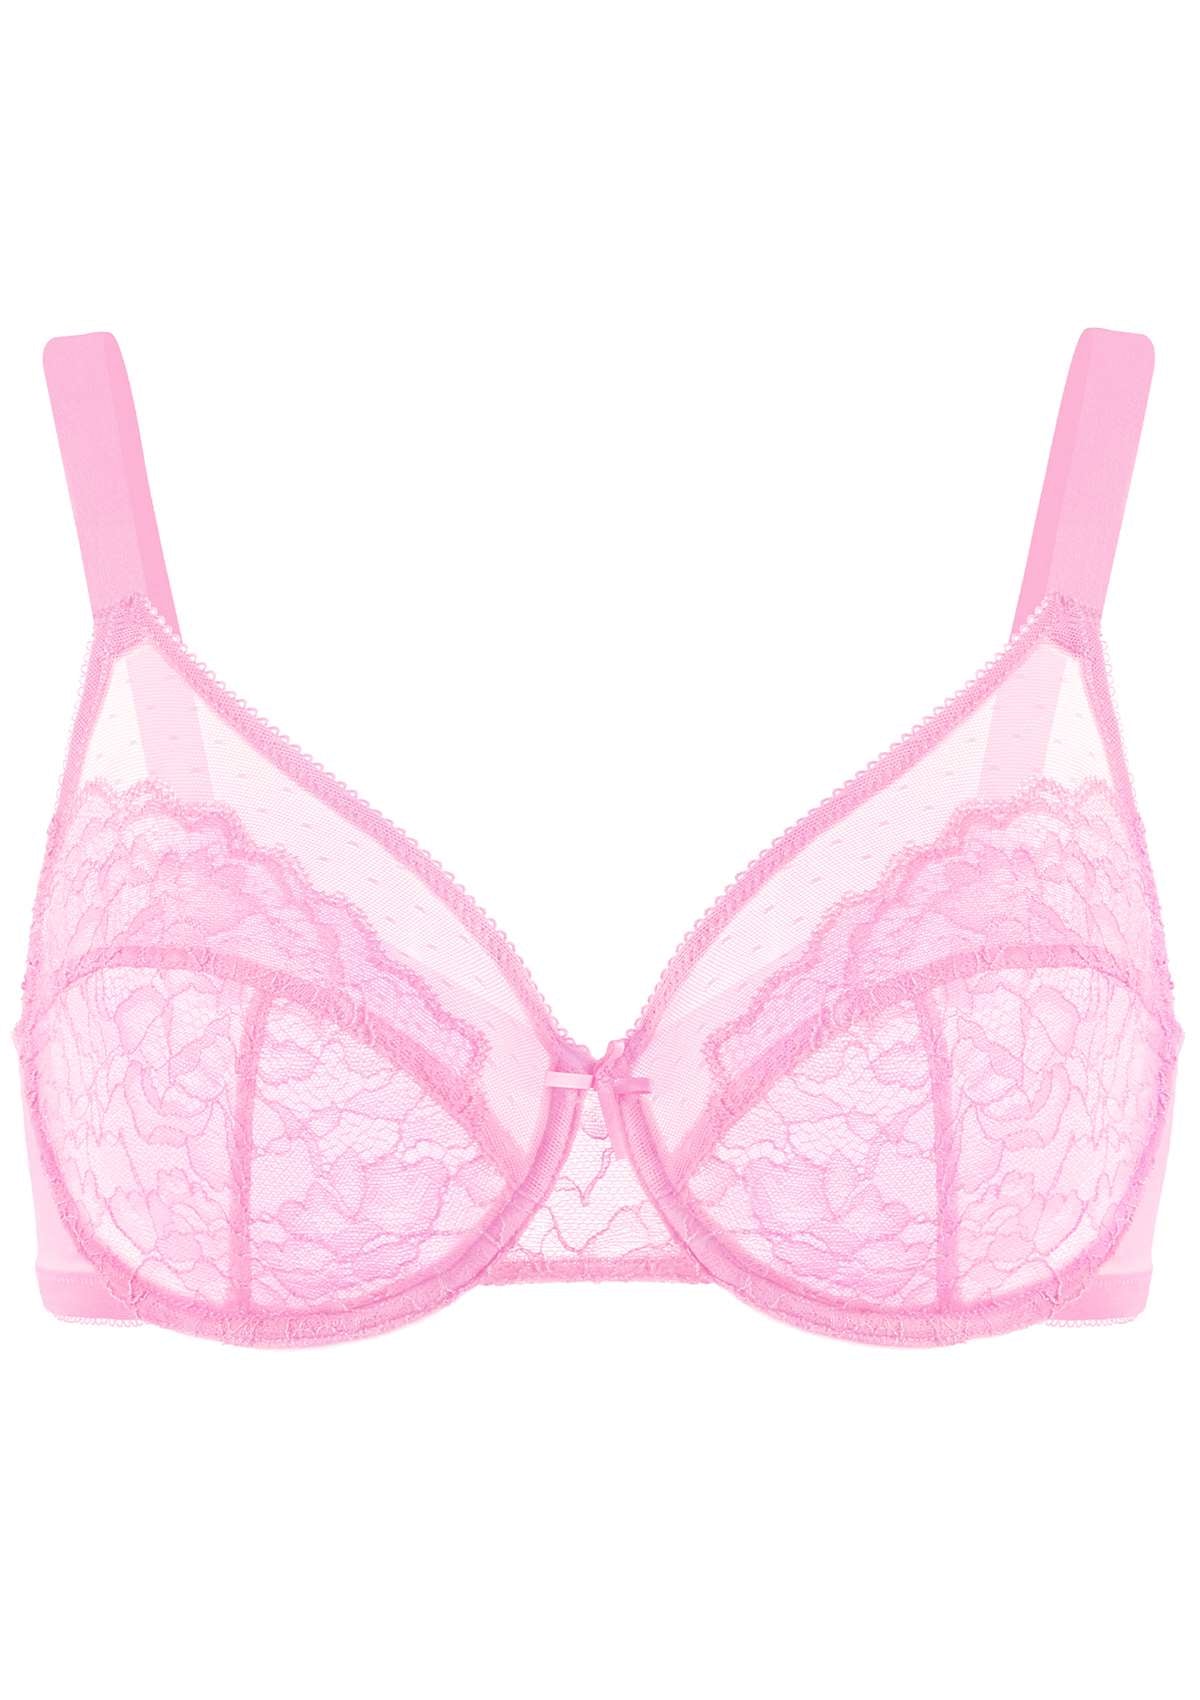 HSIA Enchante Lacy Bra: Comfy Sheer Lace Bra With Lift - Pink / 38 / DDD/F